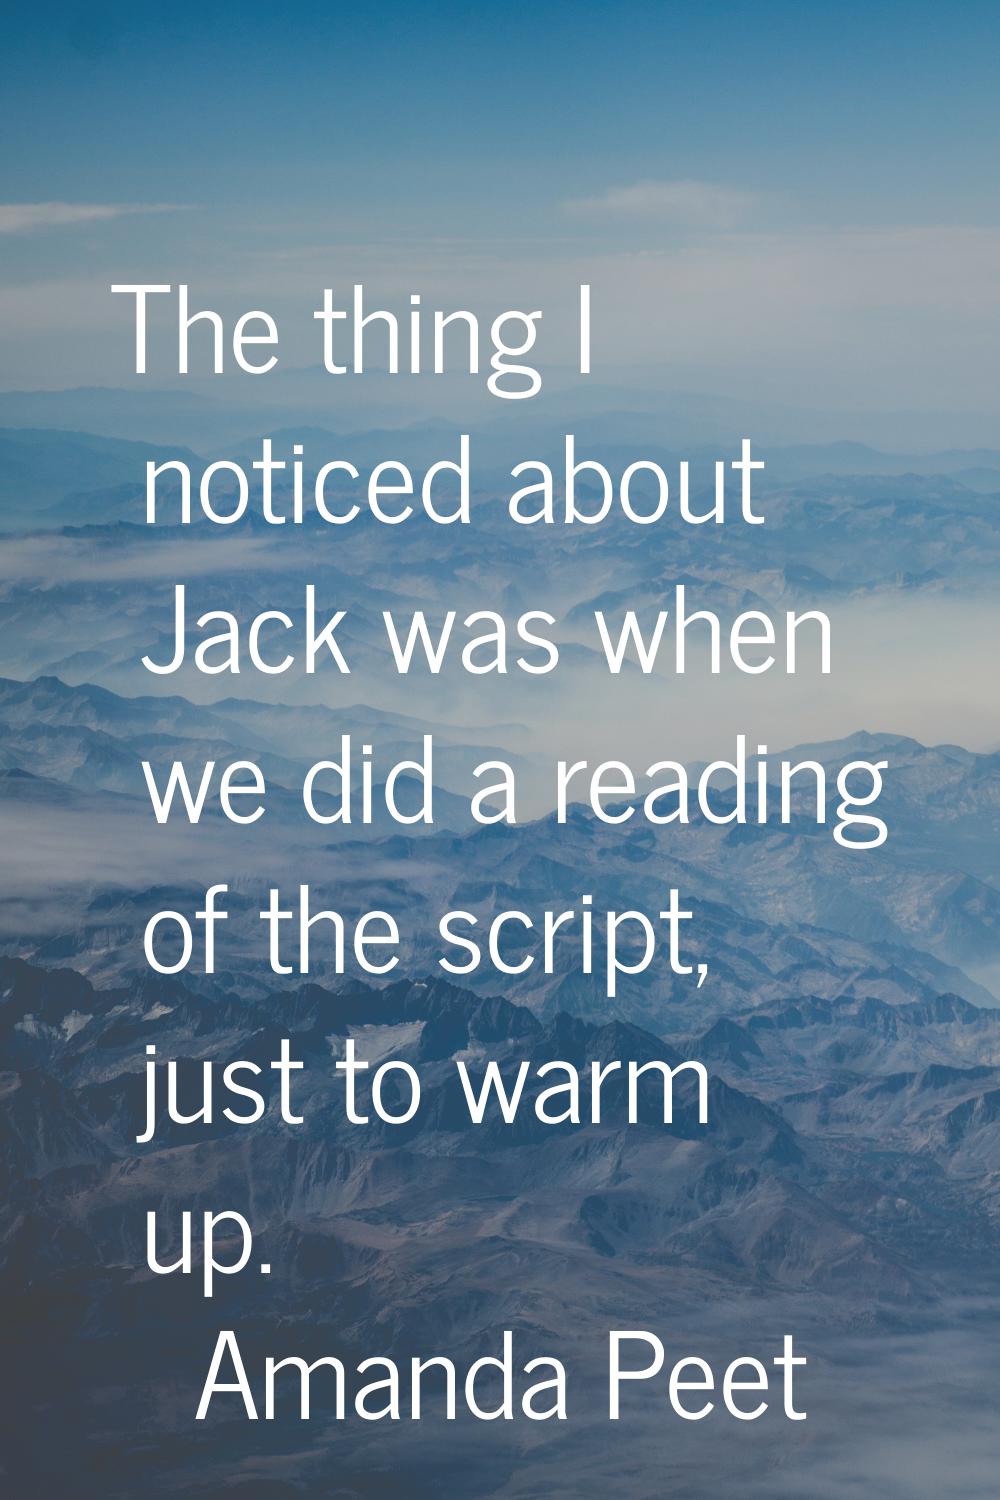 The thing I noticed about Jack was when we did a reading of the script, just to warm up.